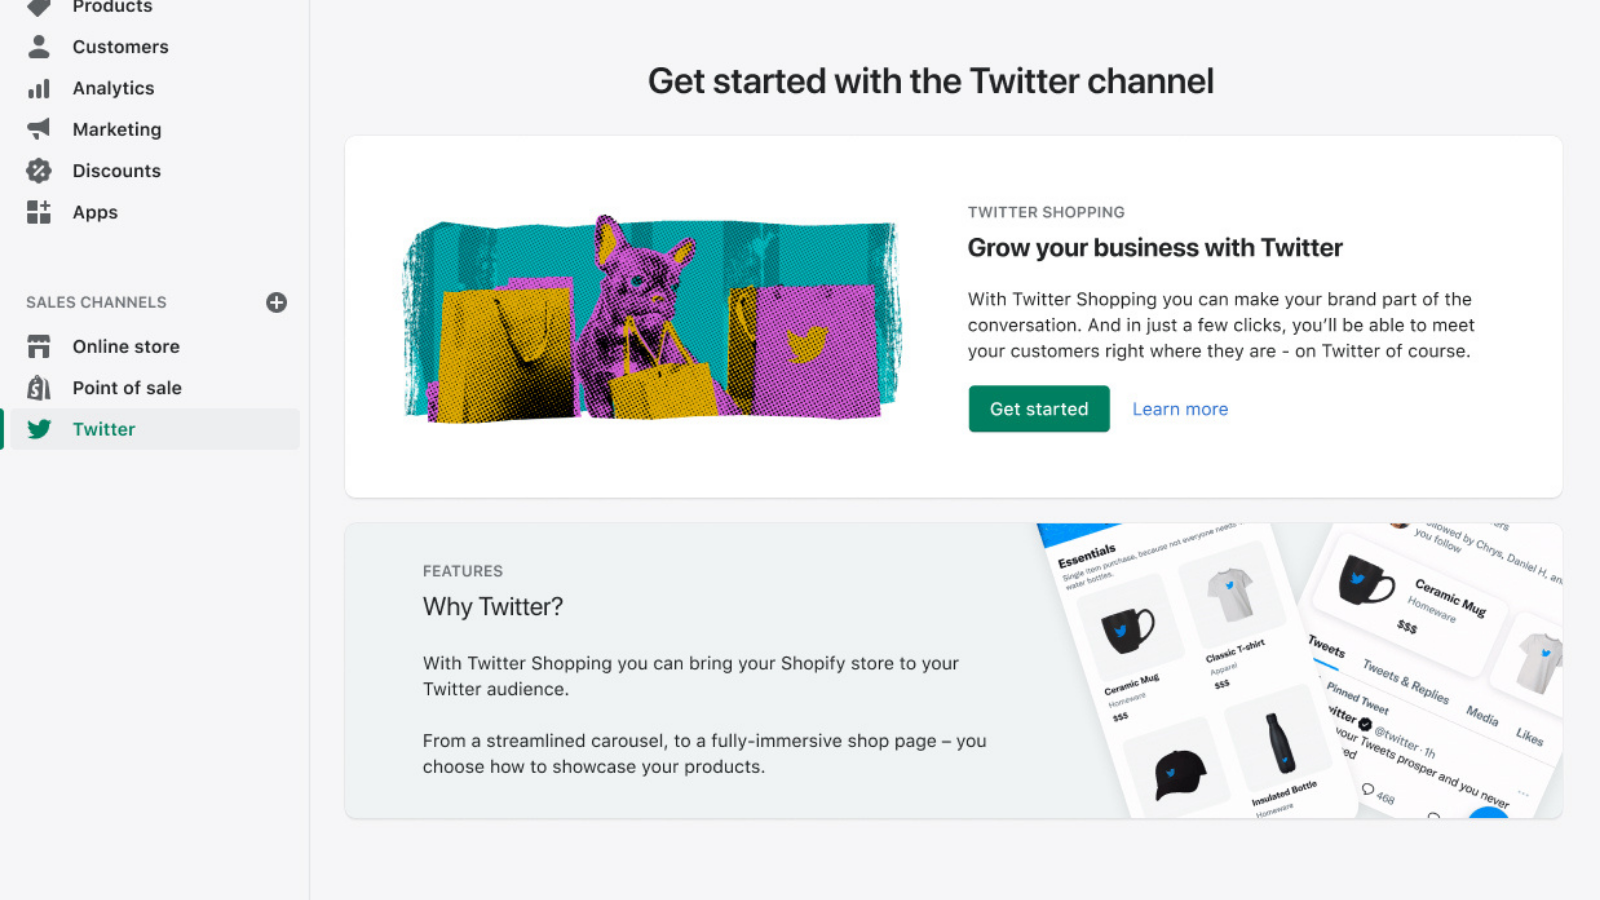 Twitter sales channel landing page